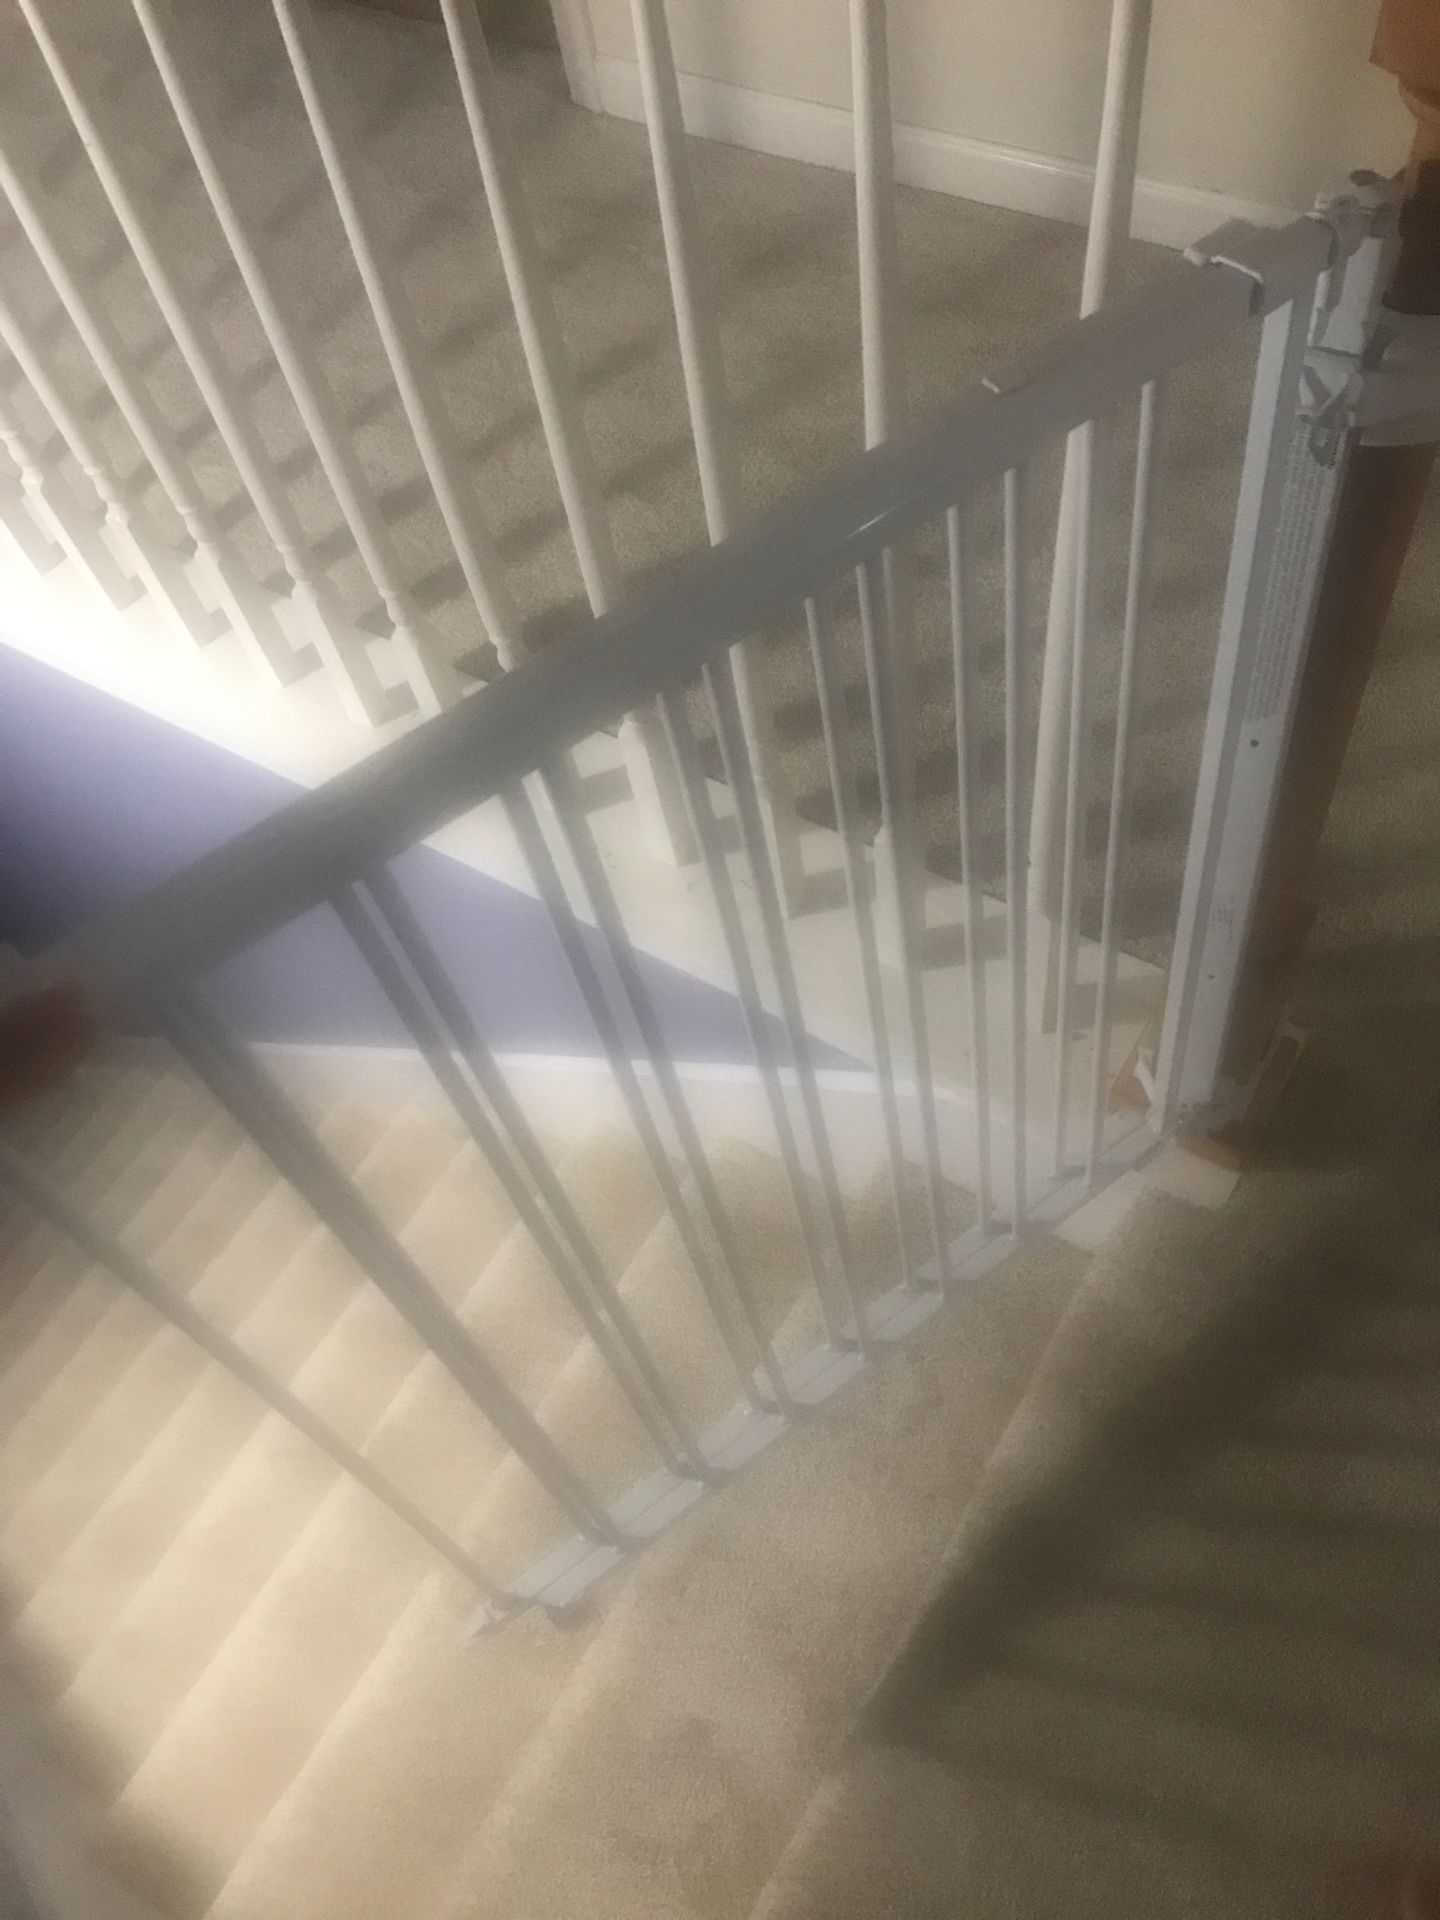 Child/pet gate for stairs